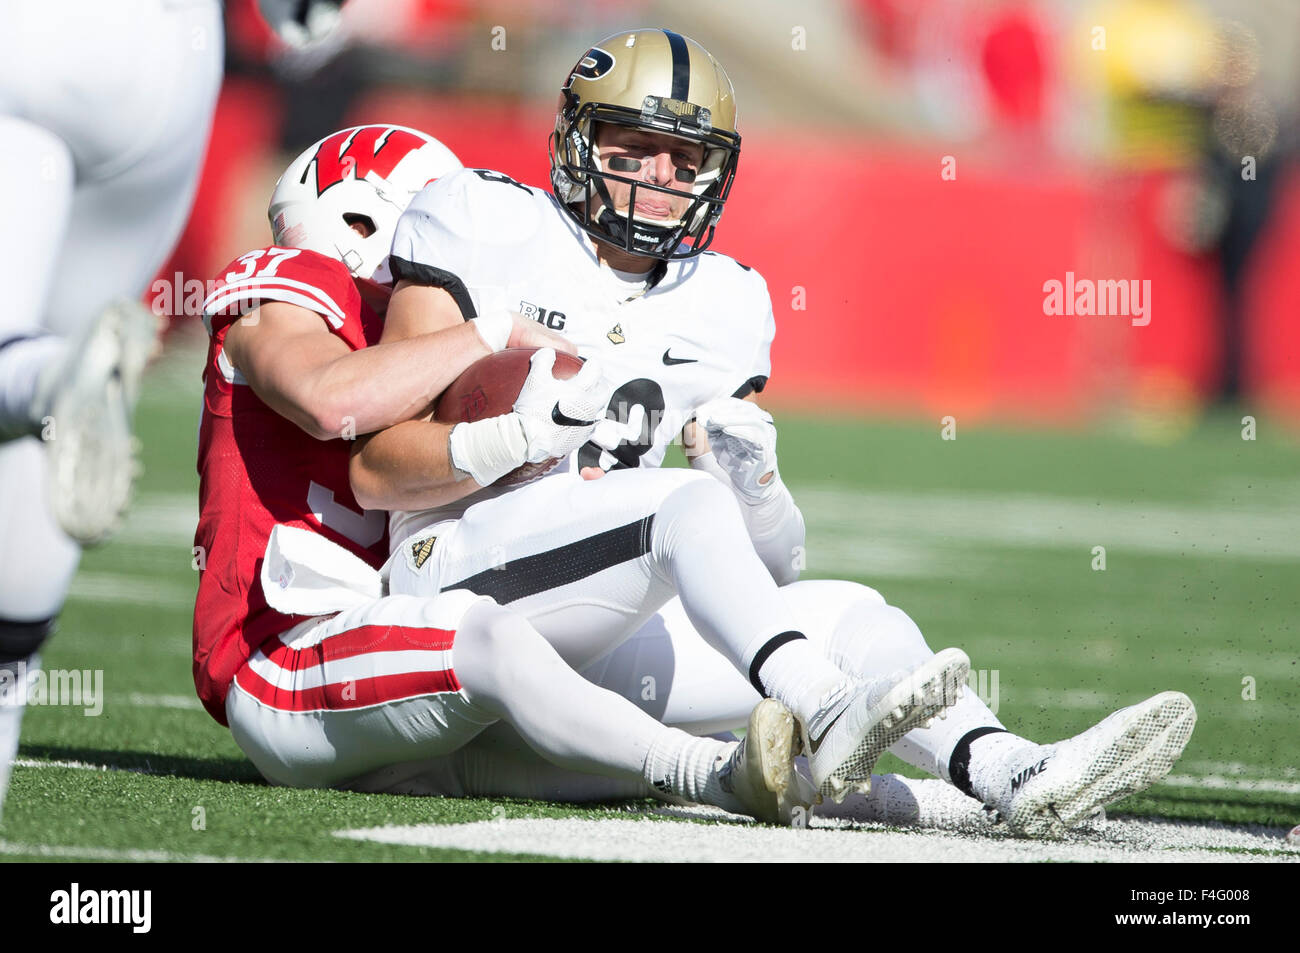 Madison, WI, USA. 17th Oct, 2015. Wisconsin Badgers safety Bret Verstegen #37 tackles Purdue Boilermakers wide receiver Danny Anthrop #33 during the NCAA Football game between the Purdue Boilermakers and the Wisconsin Badgers at Camp Randall Stadium in Madison, WI. John Fisher/CSM/Alamy Live News Stock Photo